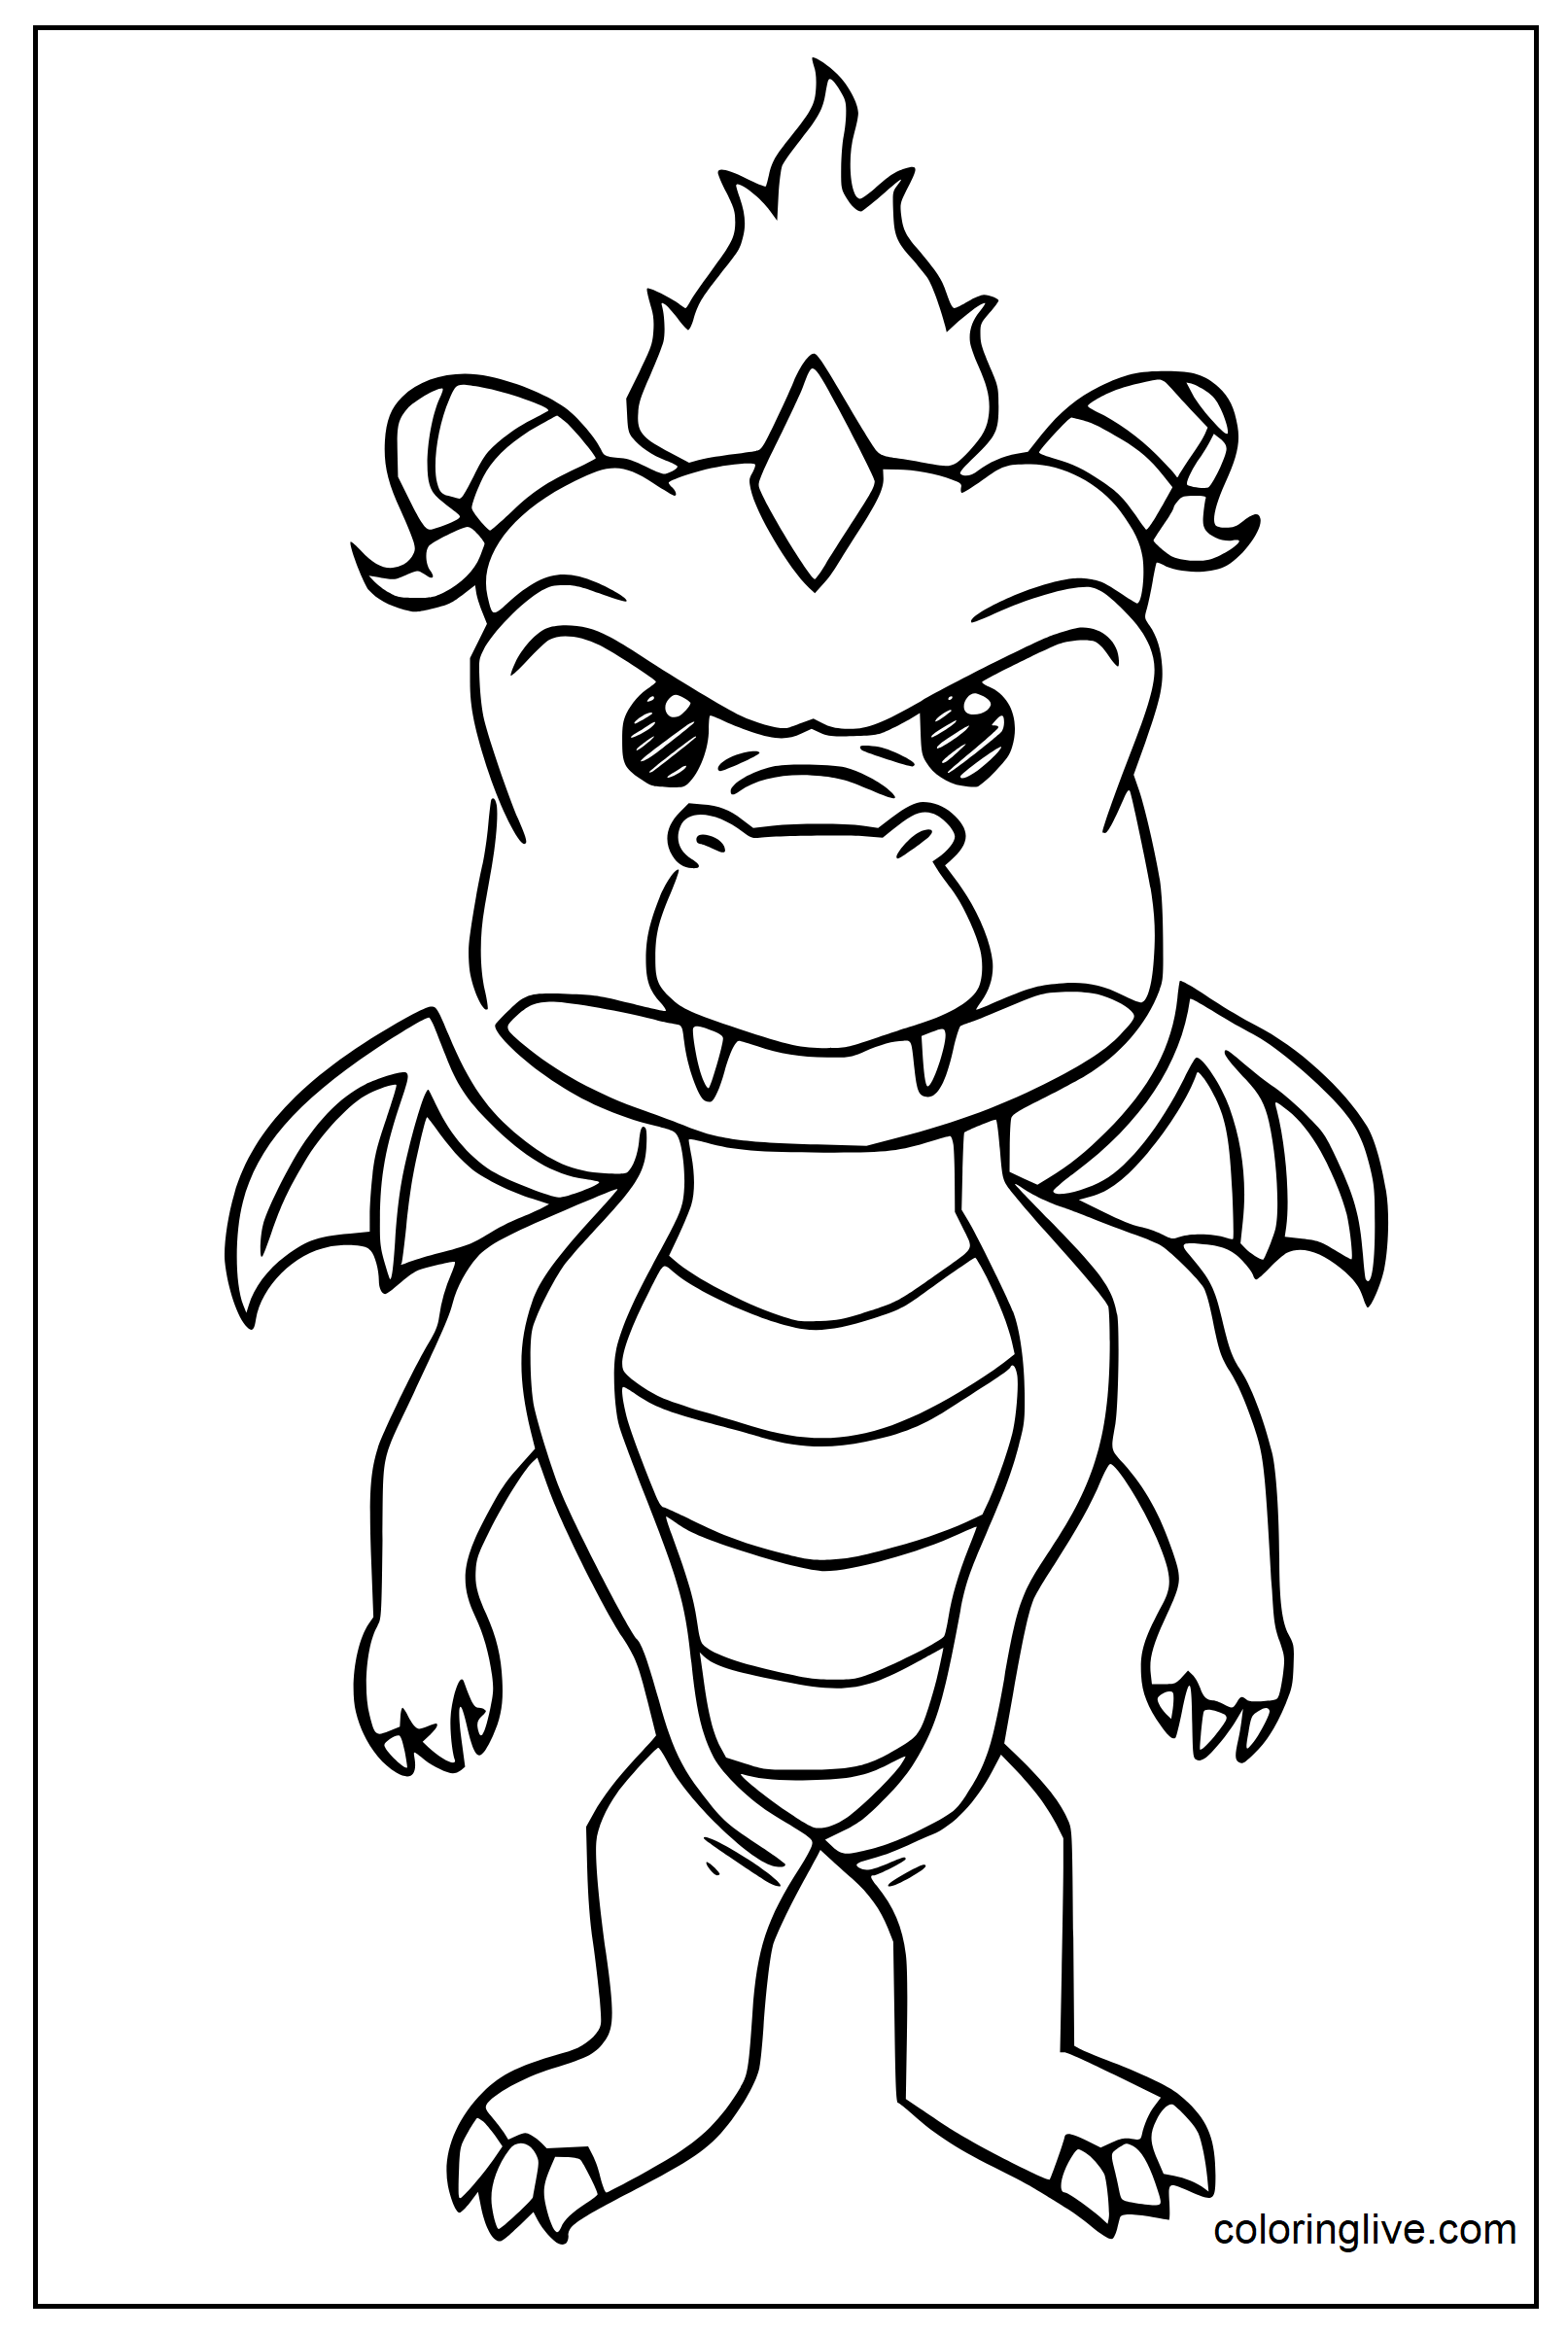 Printable Baby Dragon is angry Coloring Page for kids.